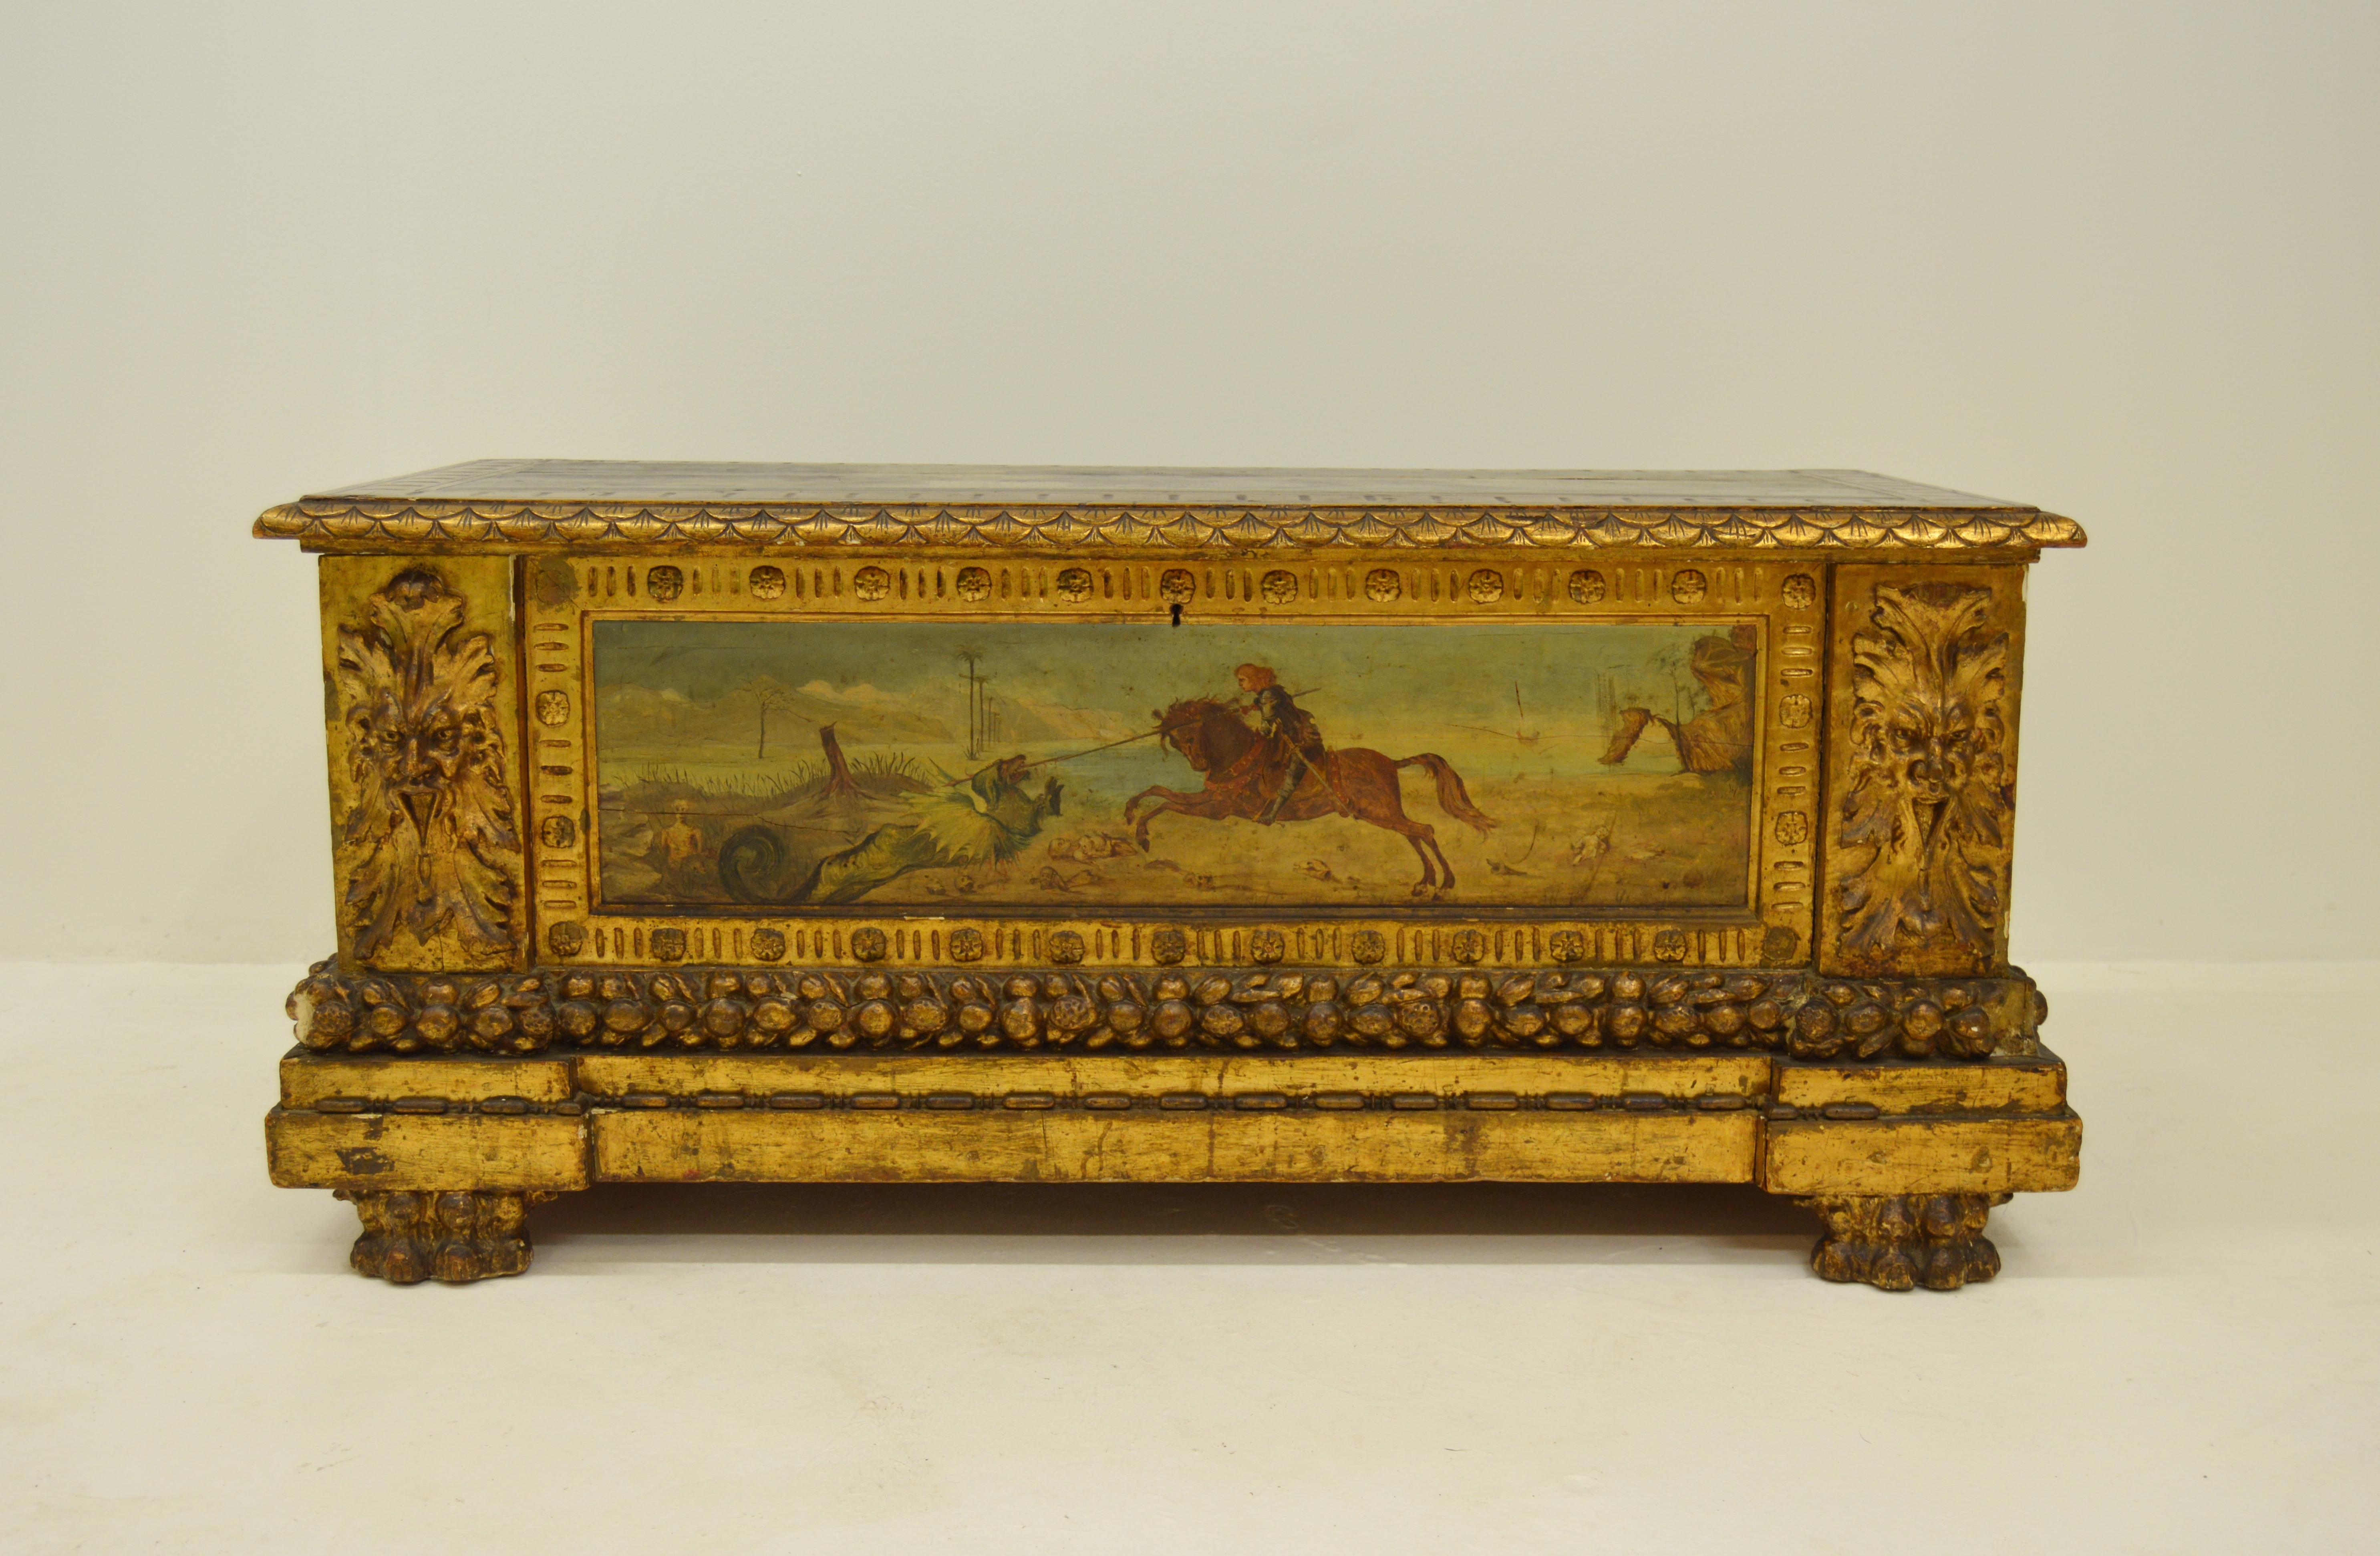 Chest from Florence. Made in the 19th century in style to resemble the original made a few centuries earlier. Painted decor with Saint George fighting against the dragon. A quality item with slight wear and a few minor parts missing, which is not